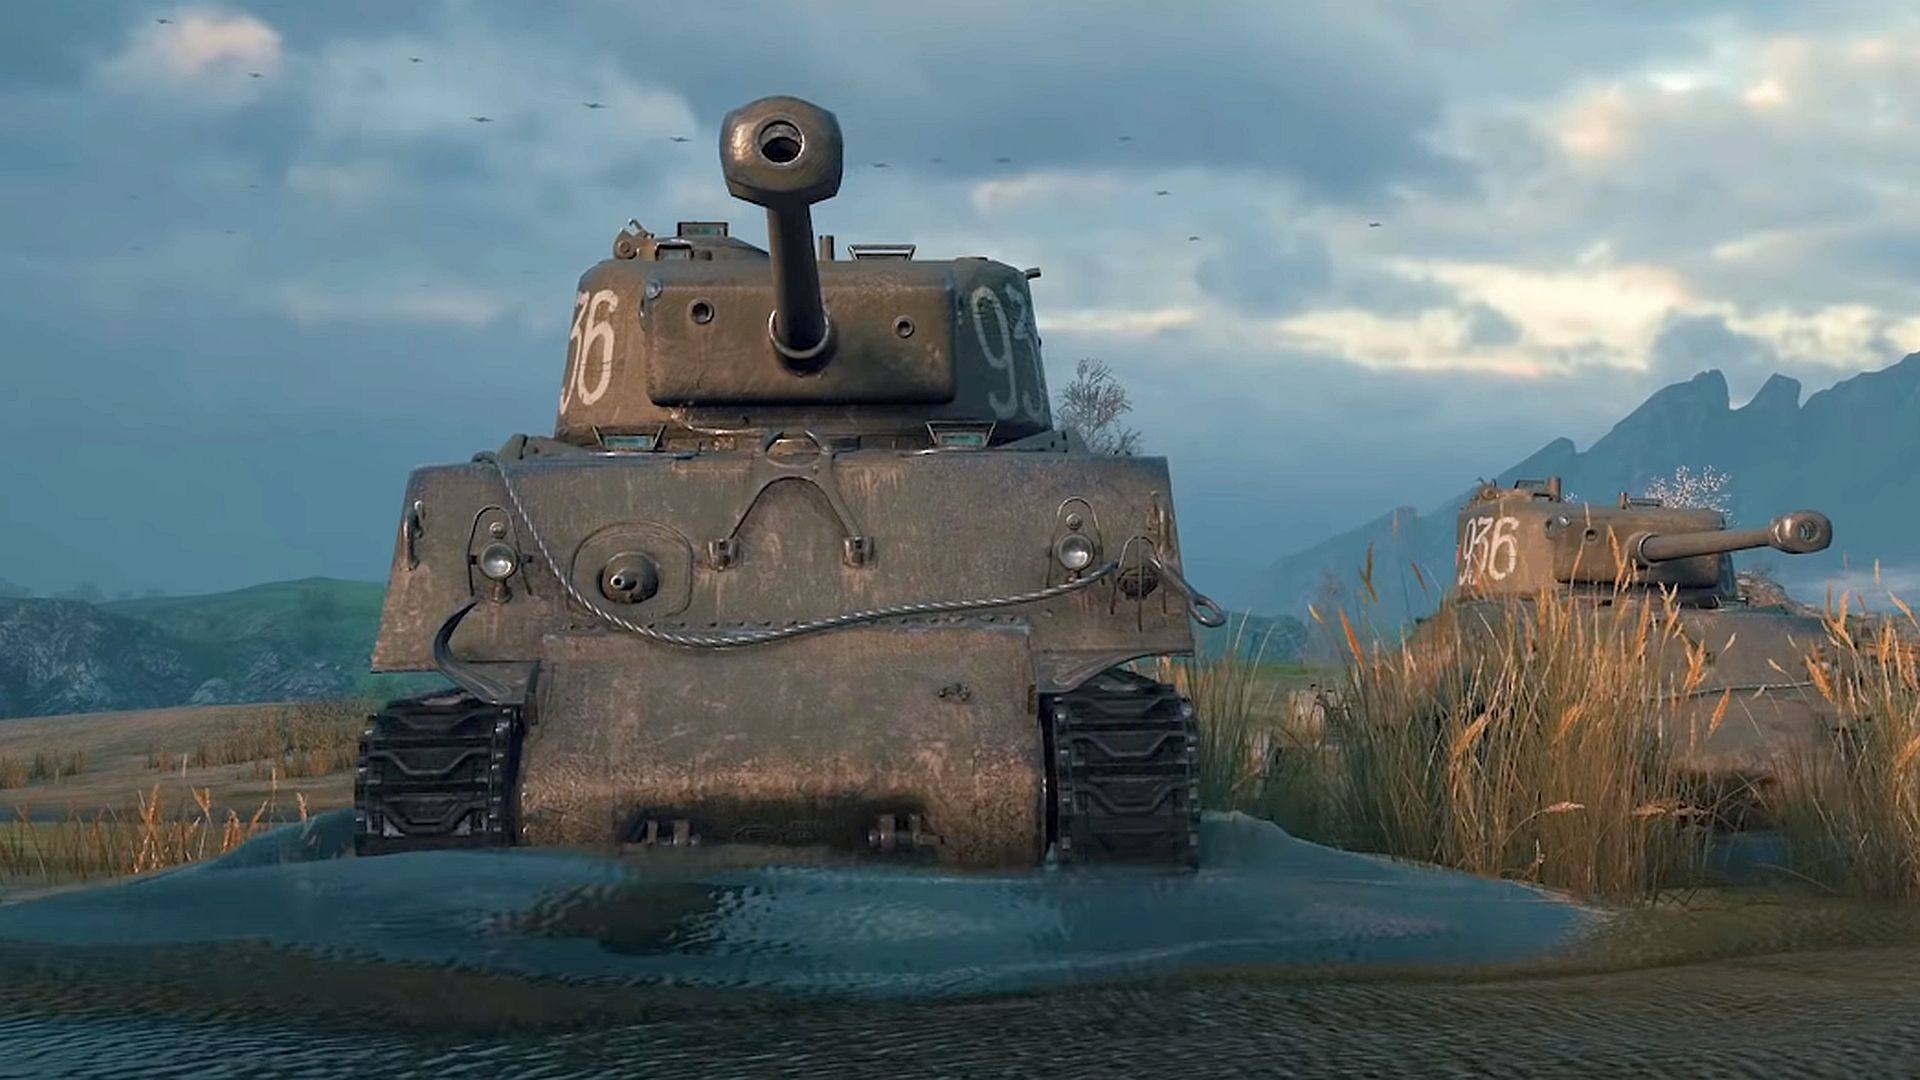 Best world war 2 games: a large tank points its cannon to the sky while sat in a large pool of water in World of Tanks